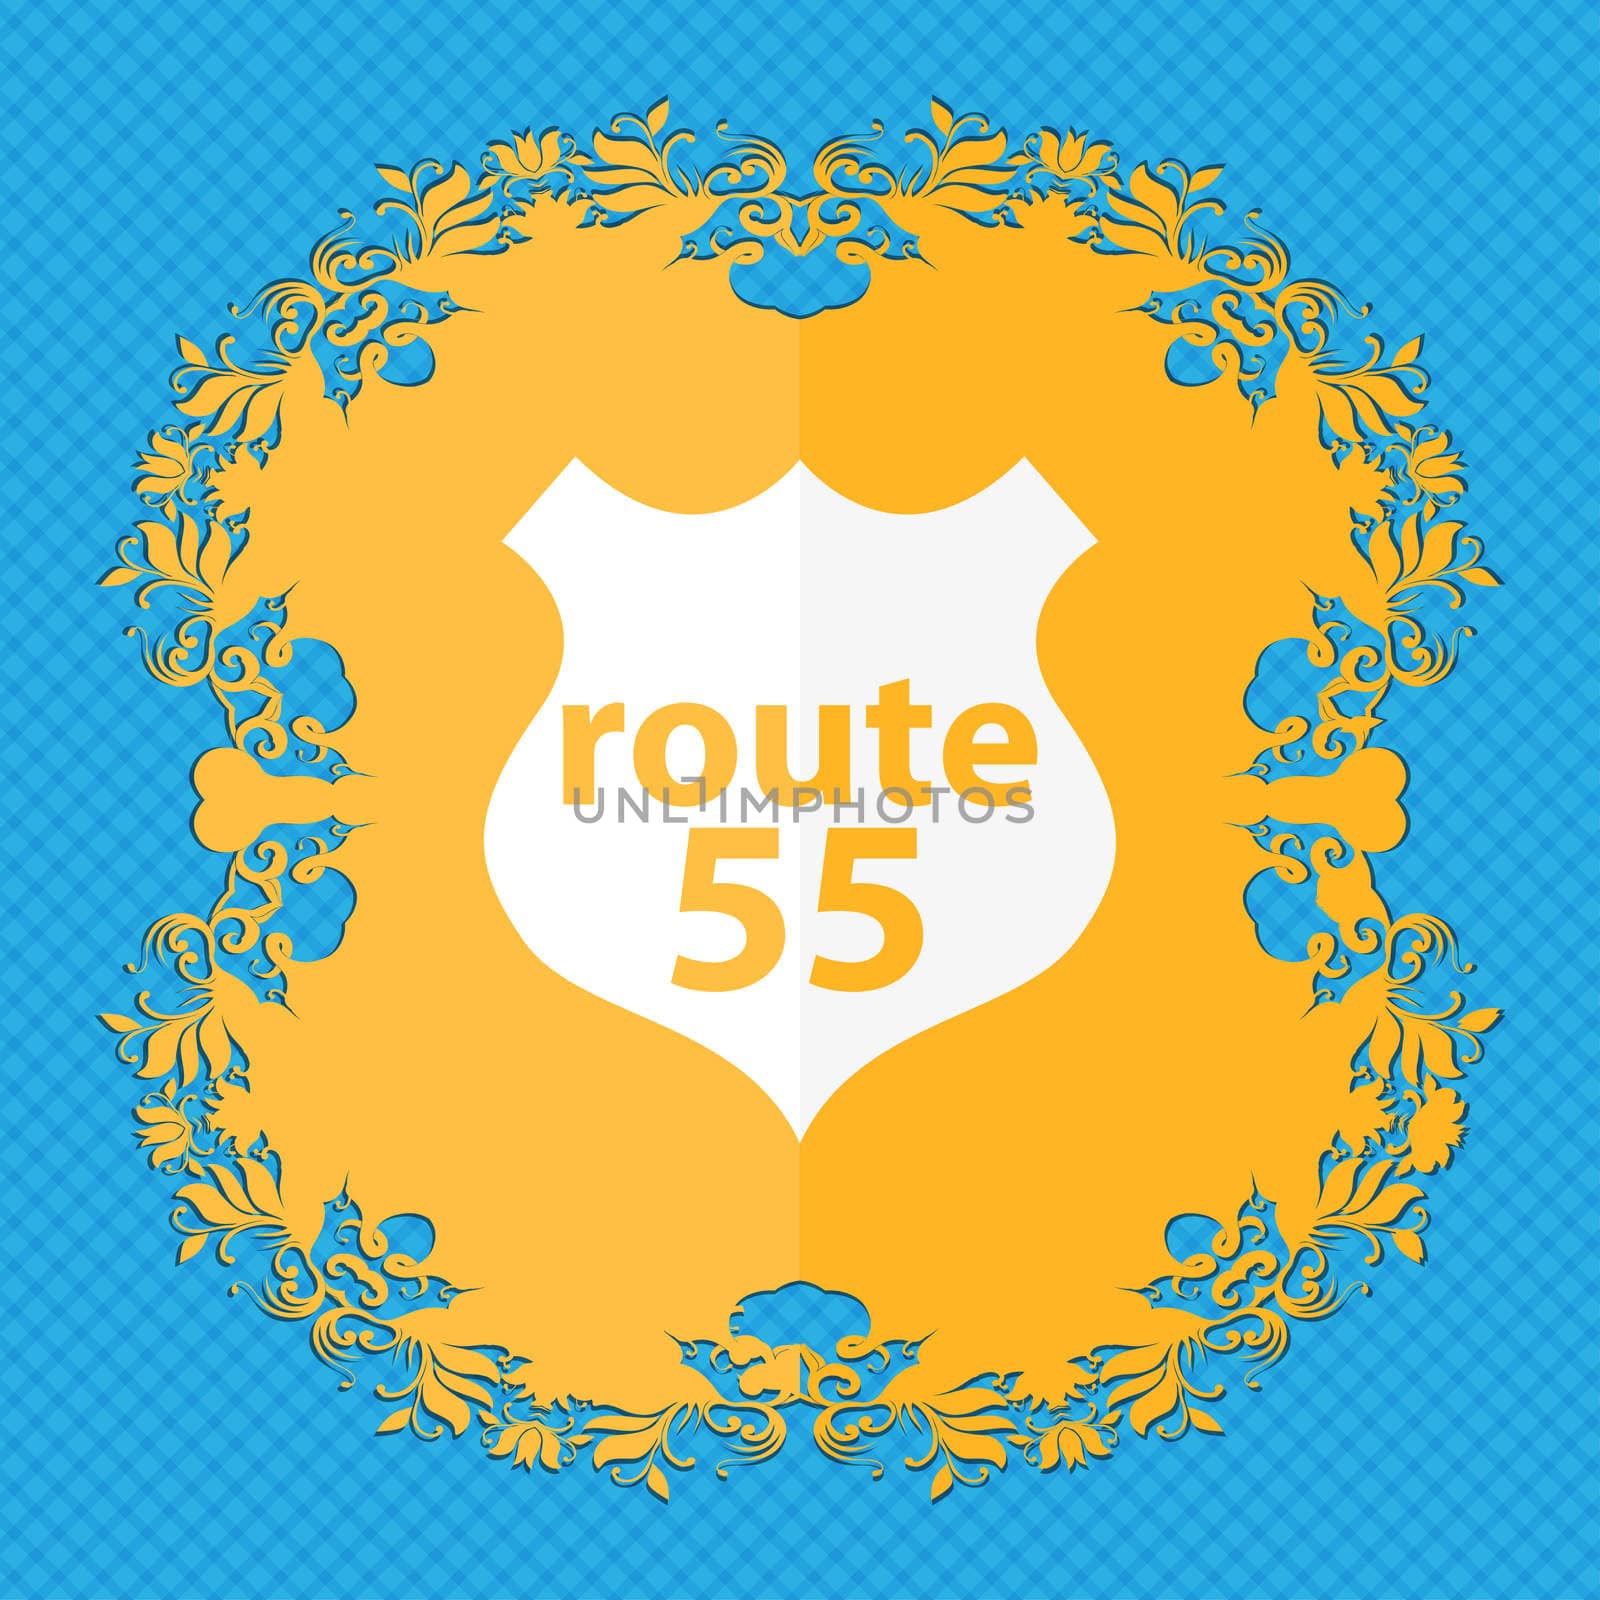 Route 55 highway icon sign. Floral flat design on a blue abstract background with place for your text. illustration